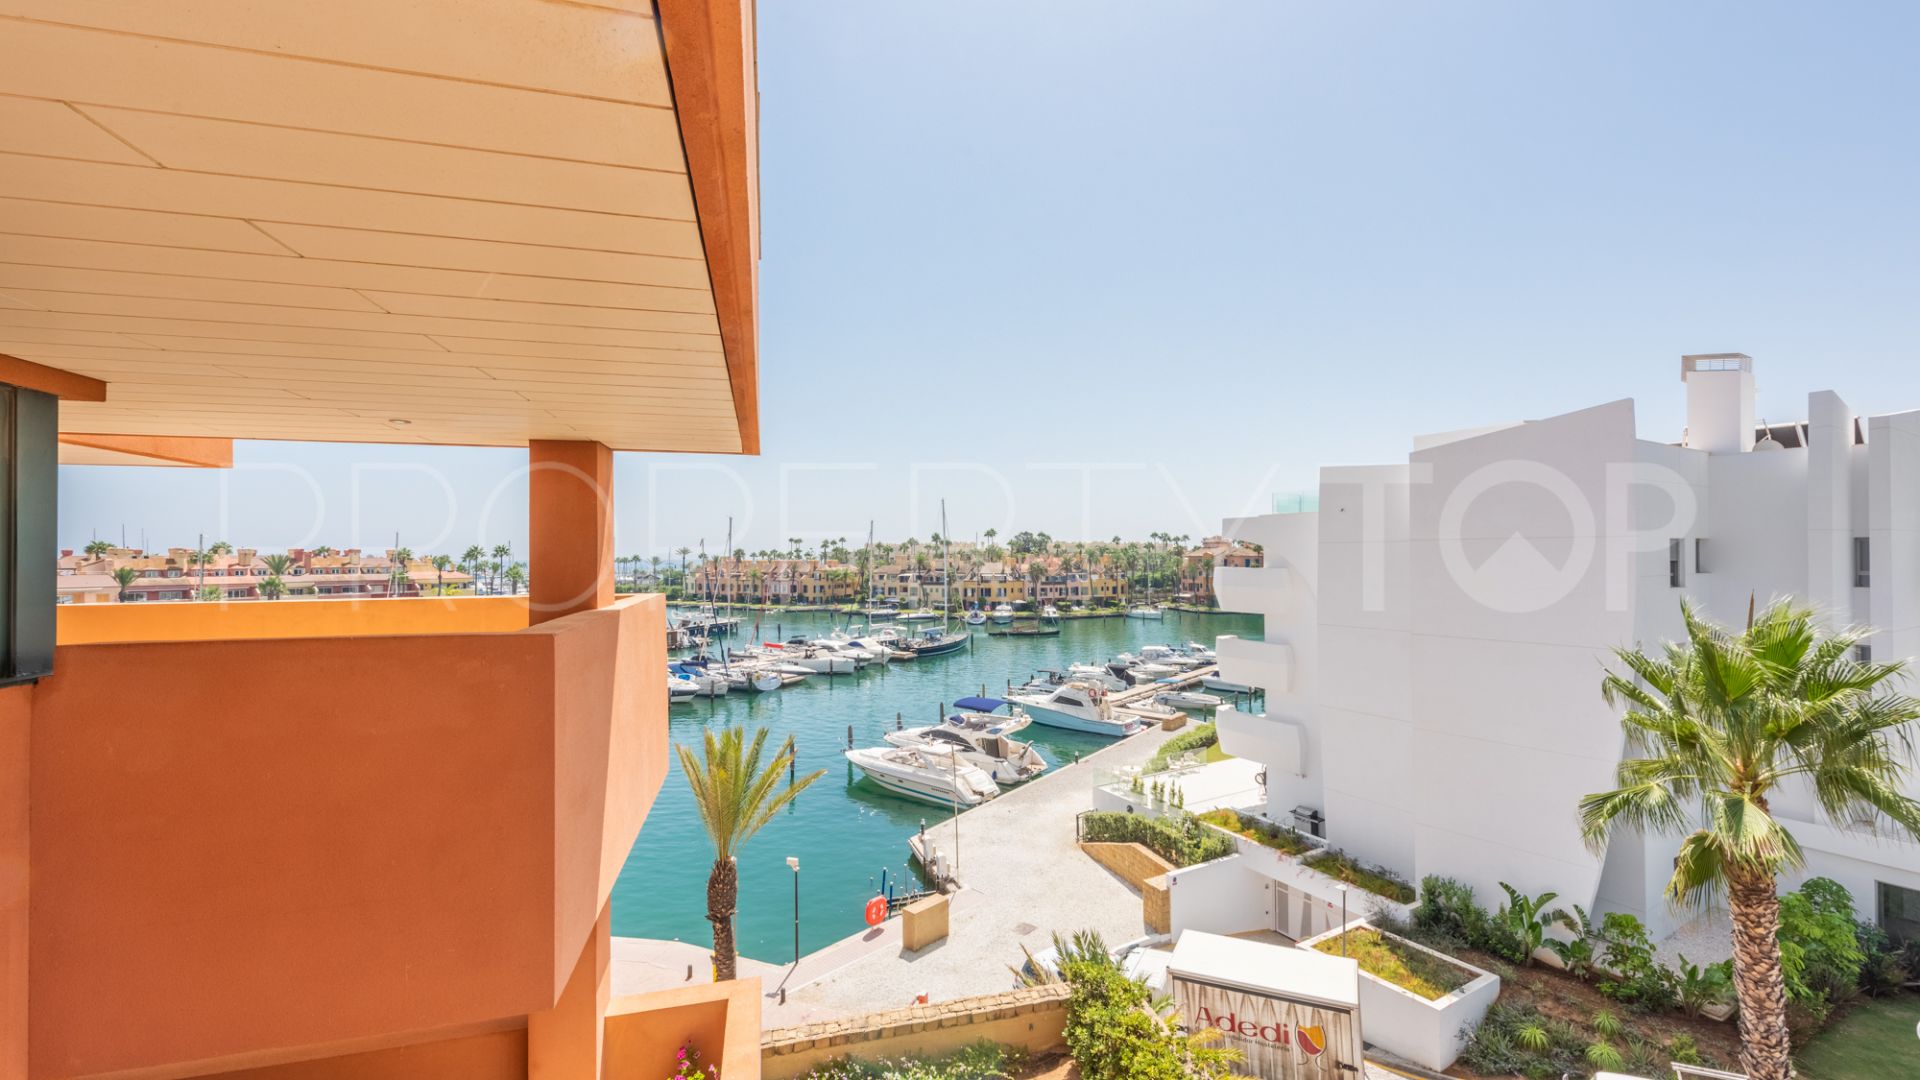 For sale apartment with 3 bedrooms in Ribera del Marlin